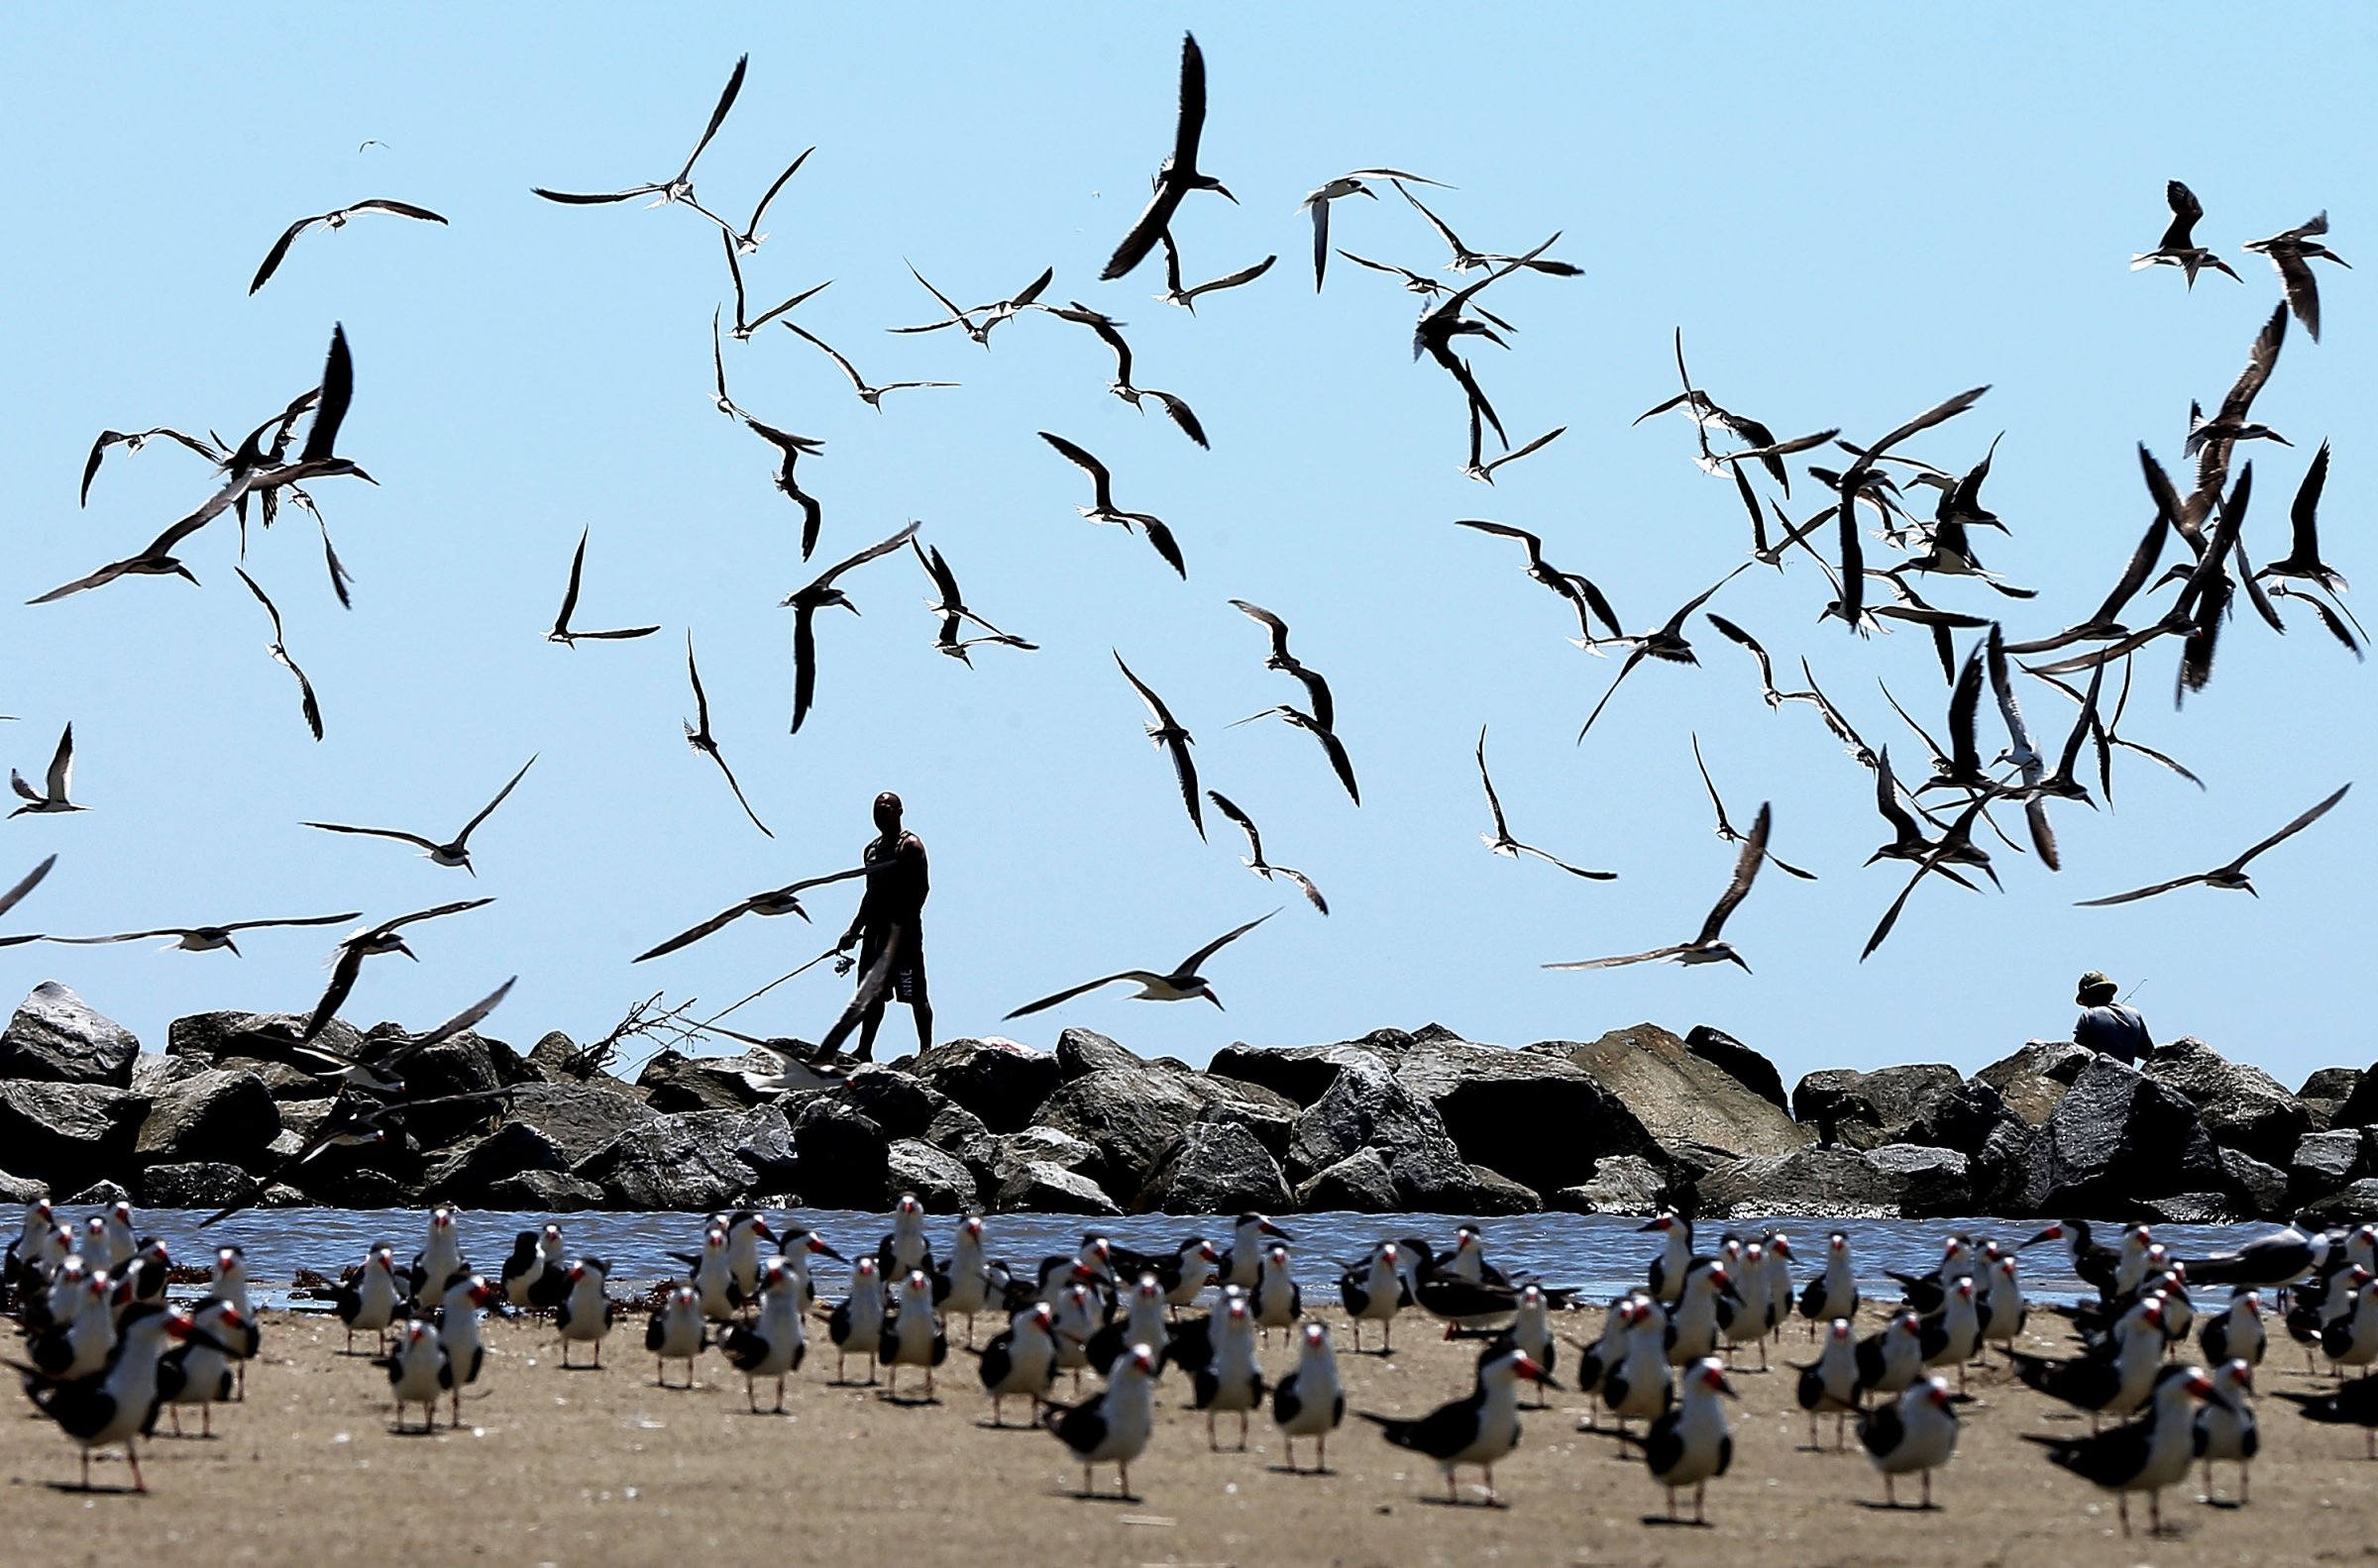 Birds fly over a man fishing on April 19, 2014 in Grand Isle, Louisiana, days after a BP announcement that it is ending its "active cleanup" on the Louisiana coast from the Deepwater Horizon oil spill.